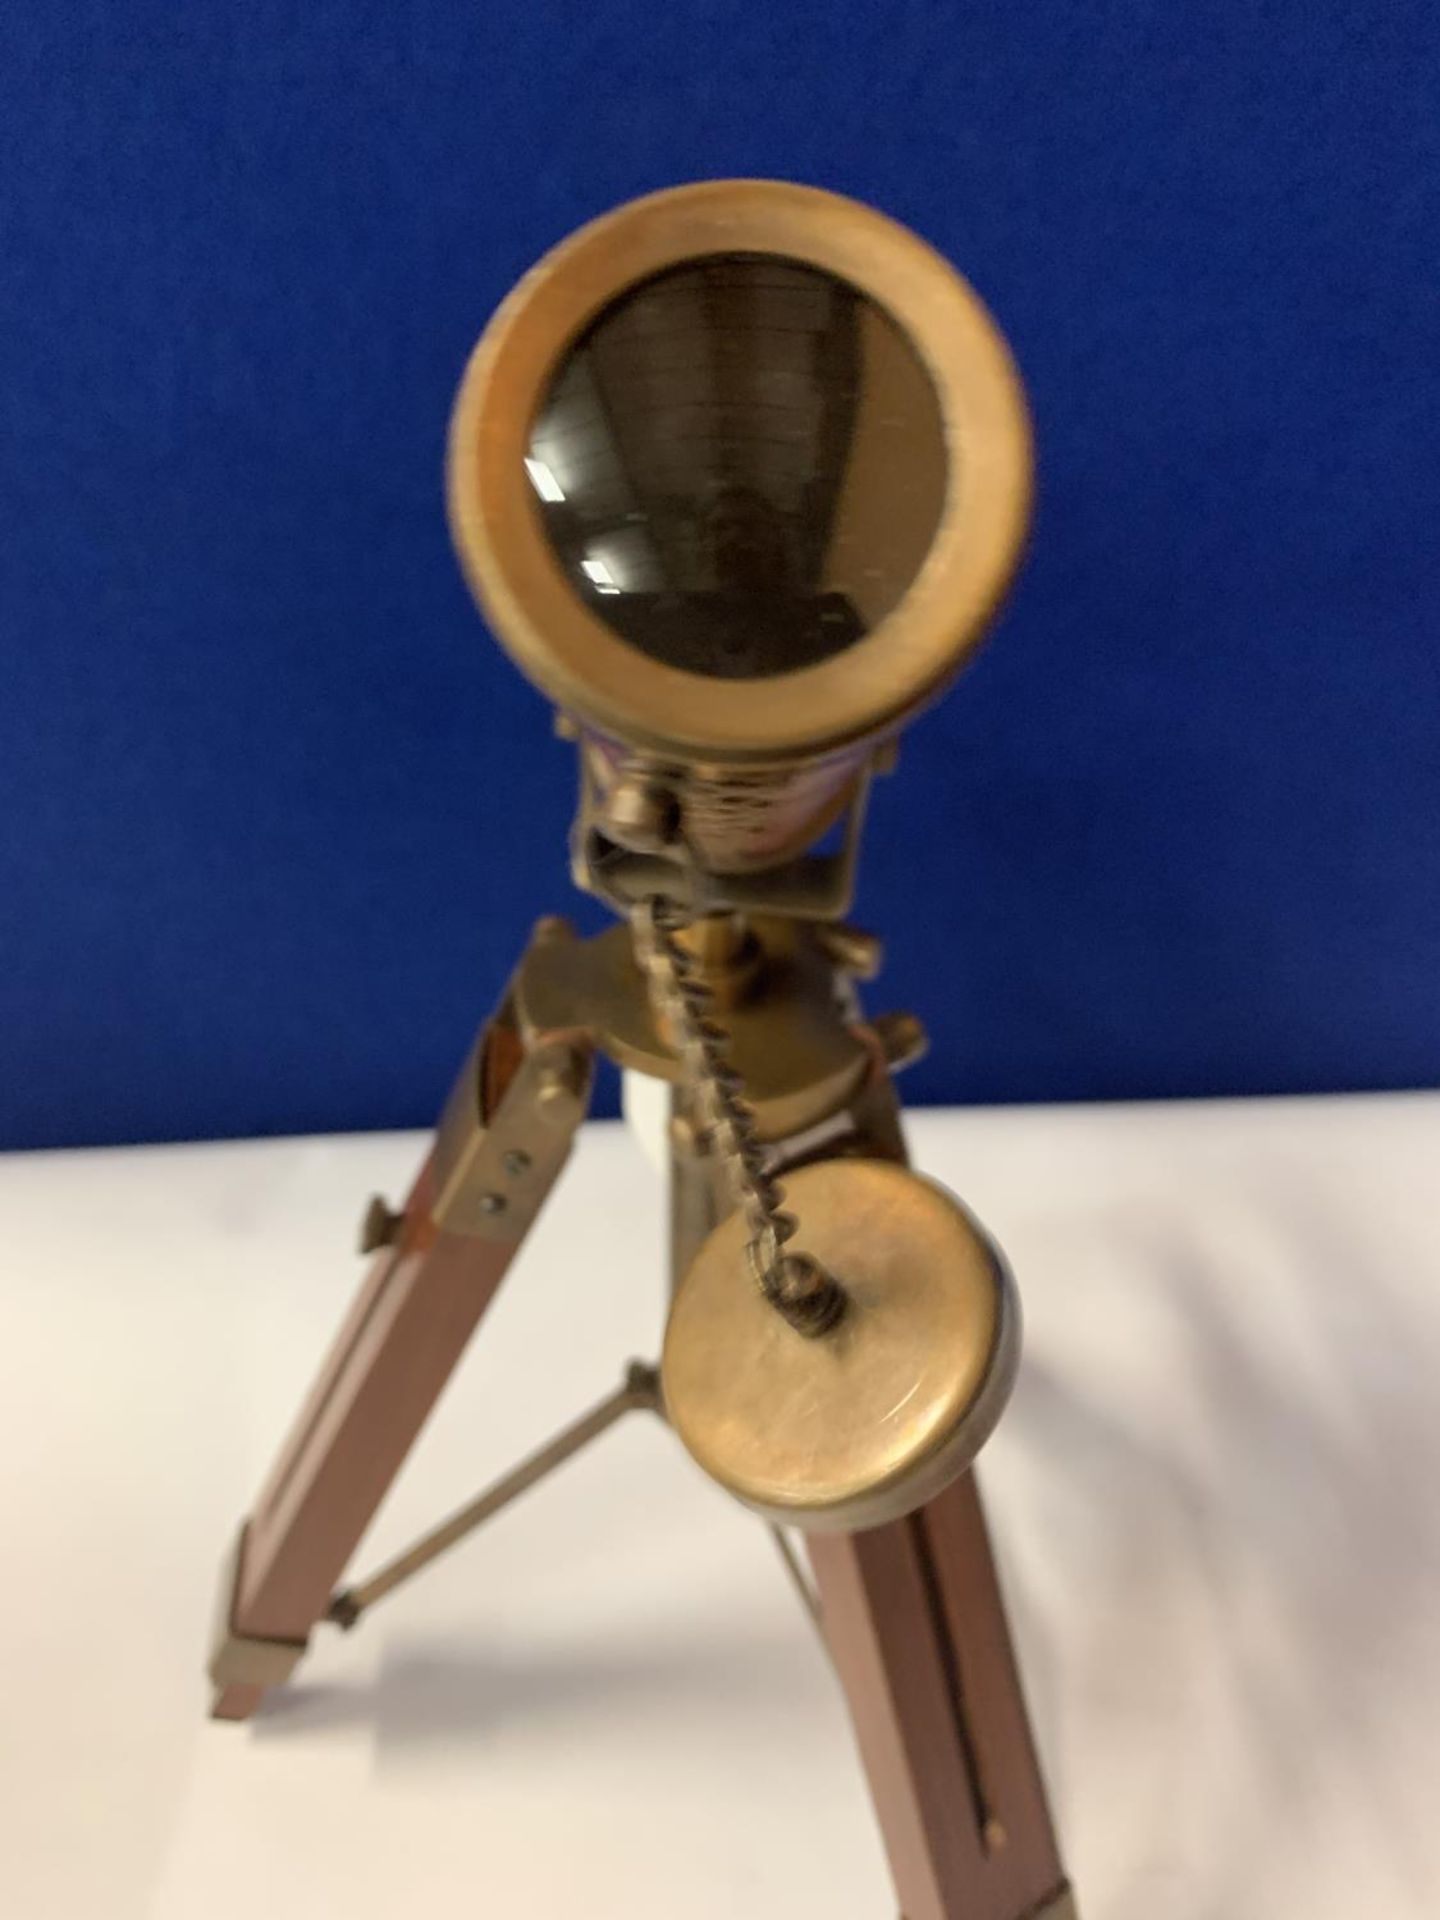 A BRASS AND LEATHER TELESCOPE ON A WOODEN STAND - Image 11 of 15